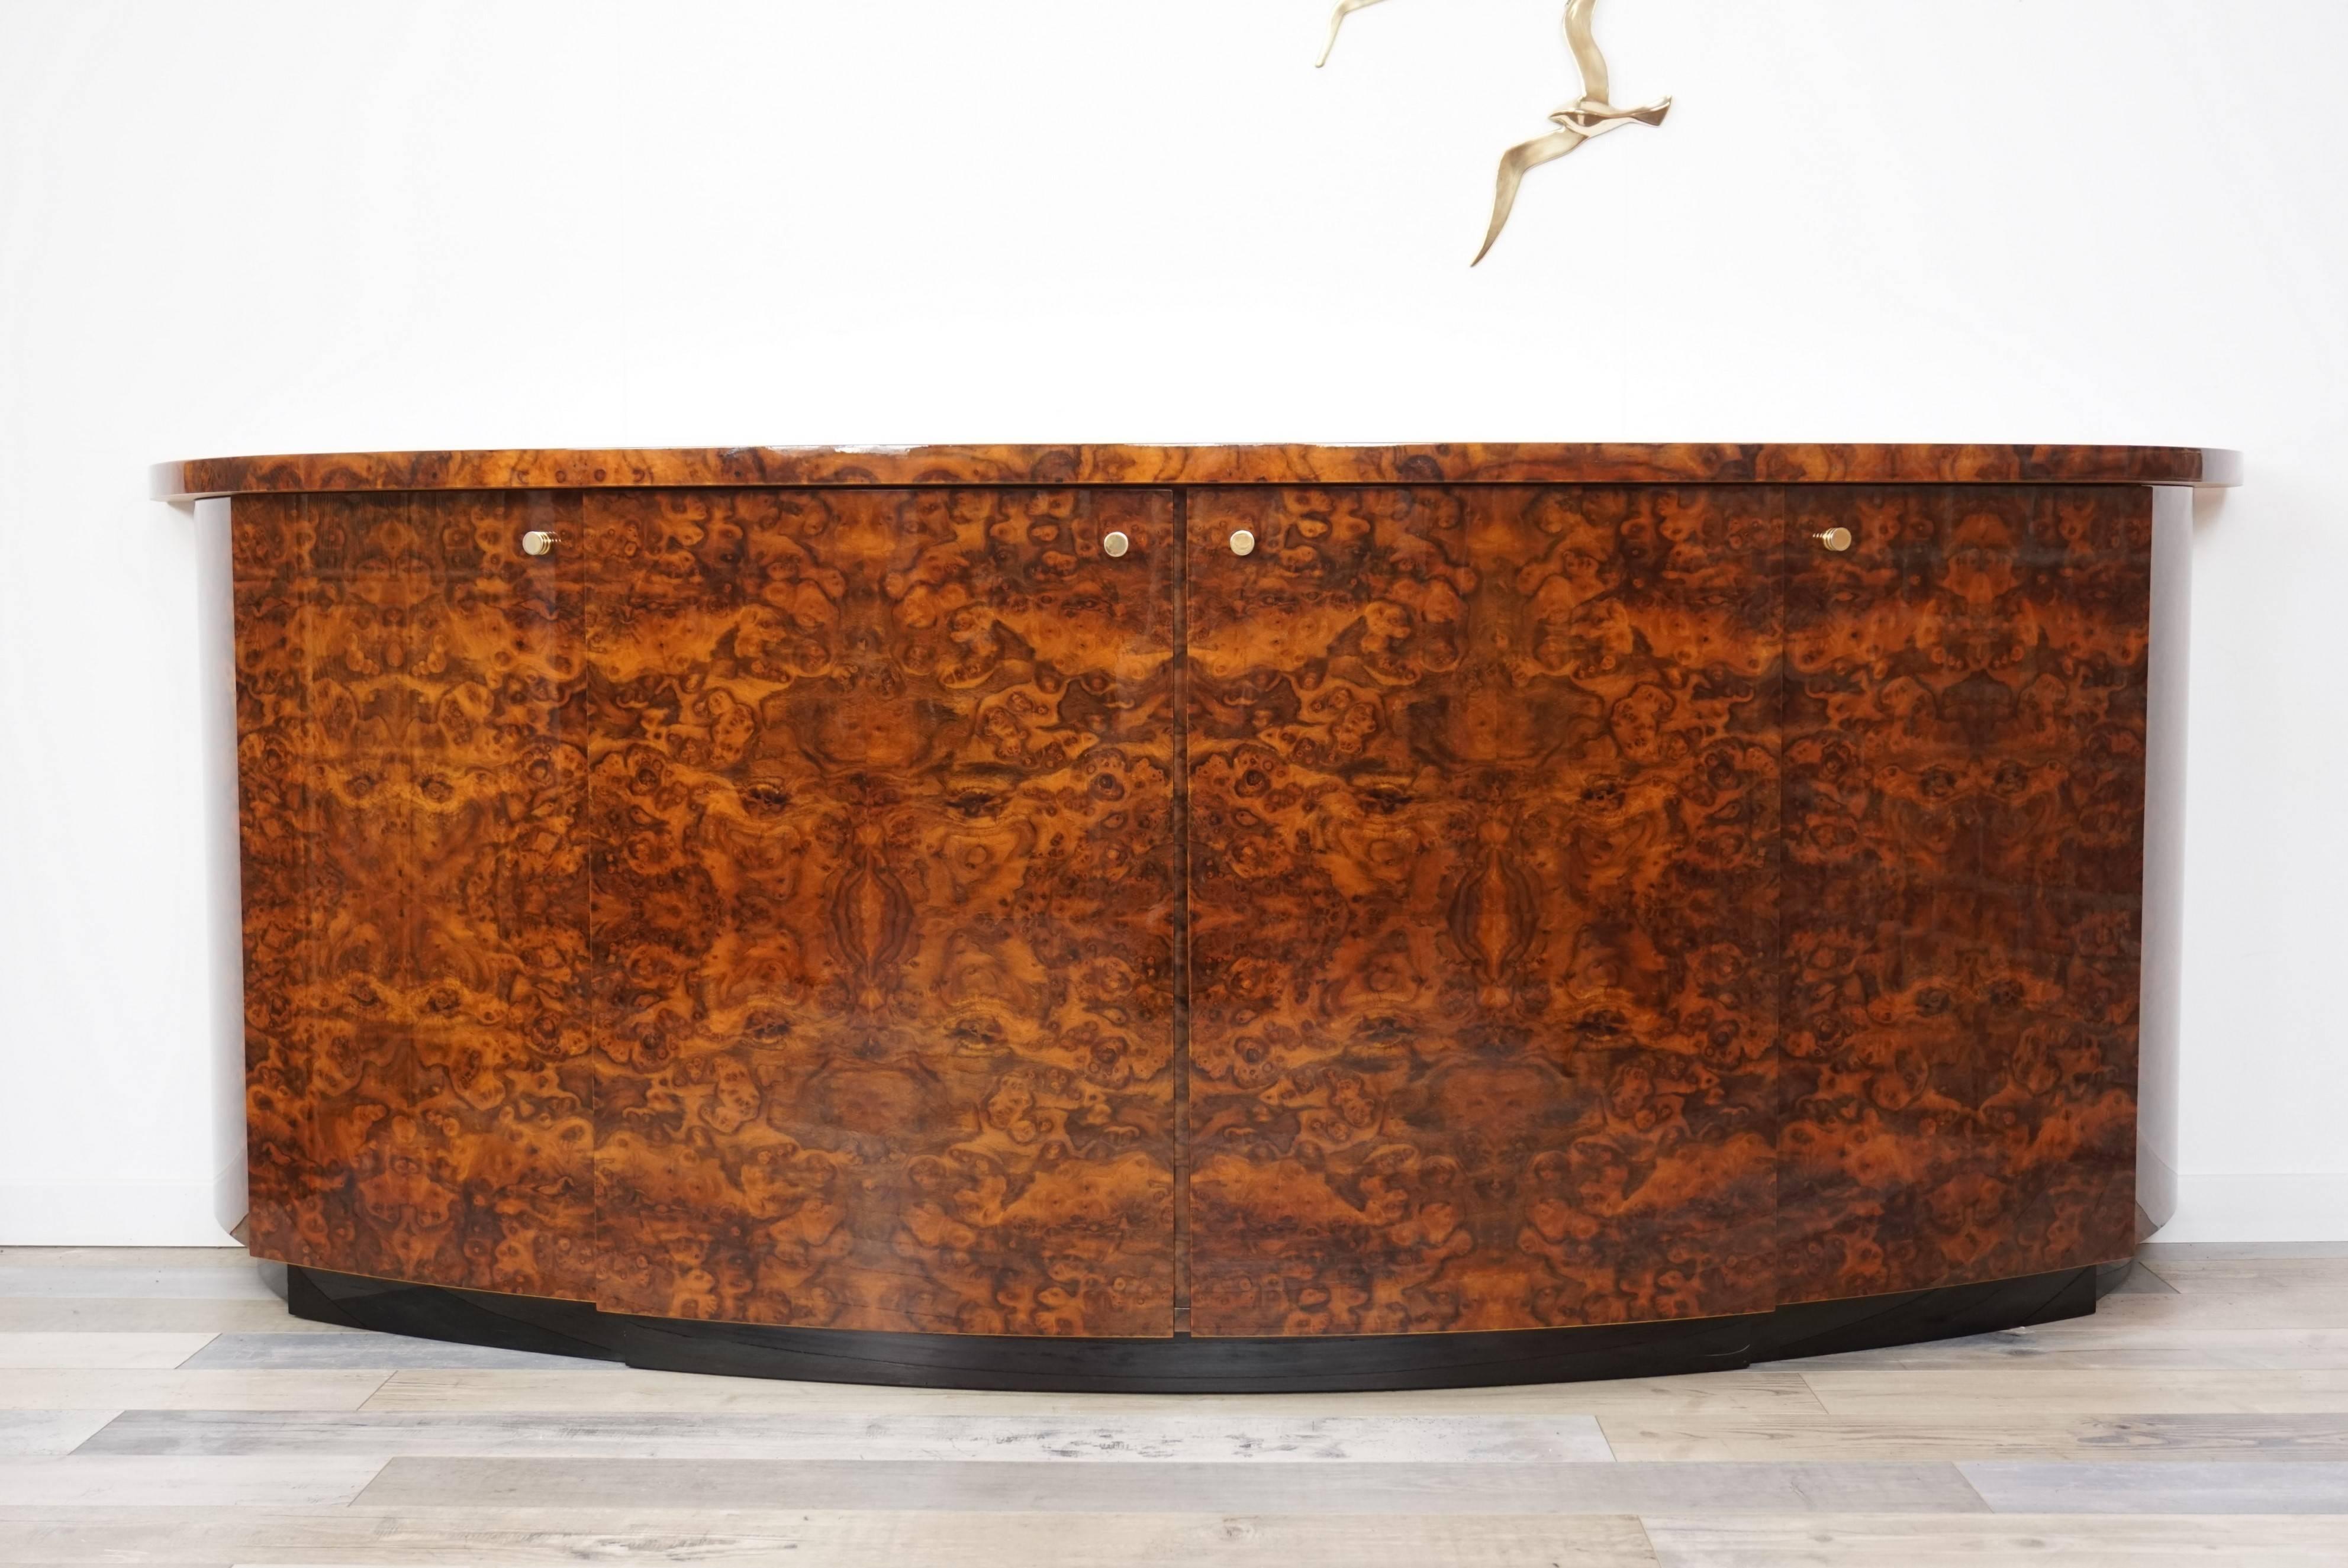 Amazing French workmanship, noble materials (lacquer, burl wood, brass) full of charm and character, lacquered burl wood structure, brass handle for this curved line and Art Deco style rare sideboard by Mahey Paris.